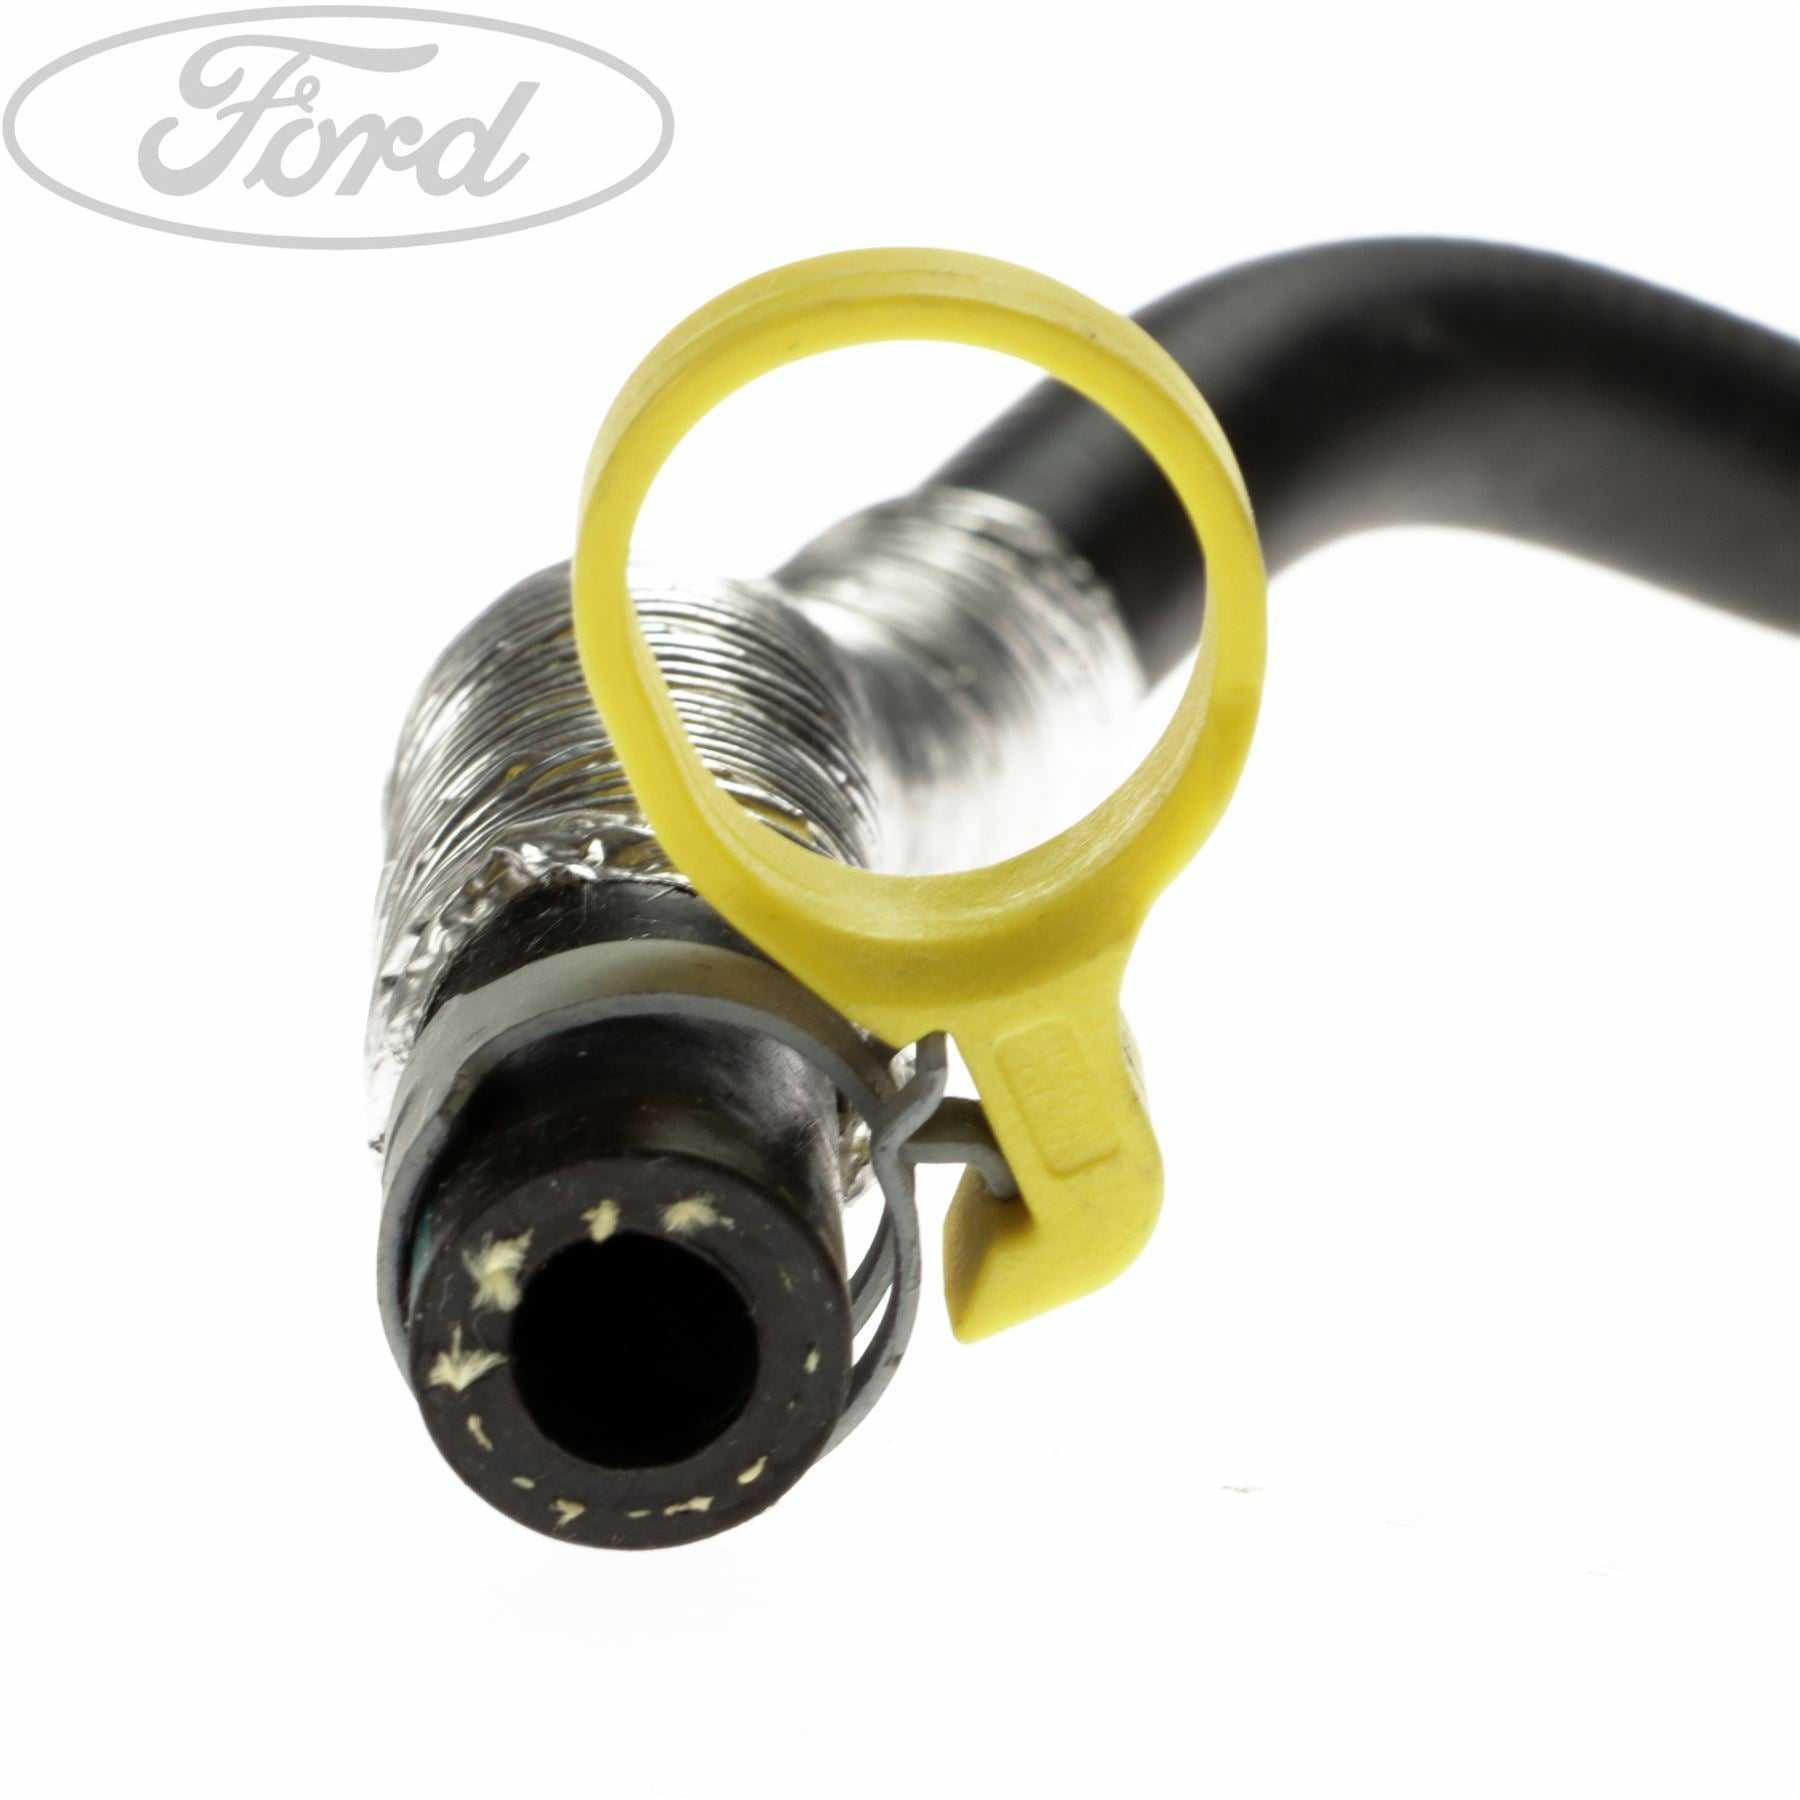 Ford, TURBOCHARGER TO INTERCOOLER HOSE